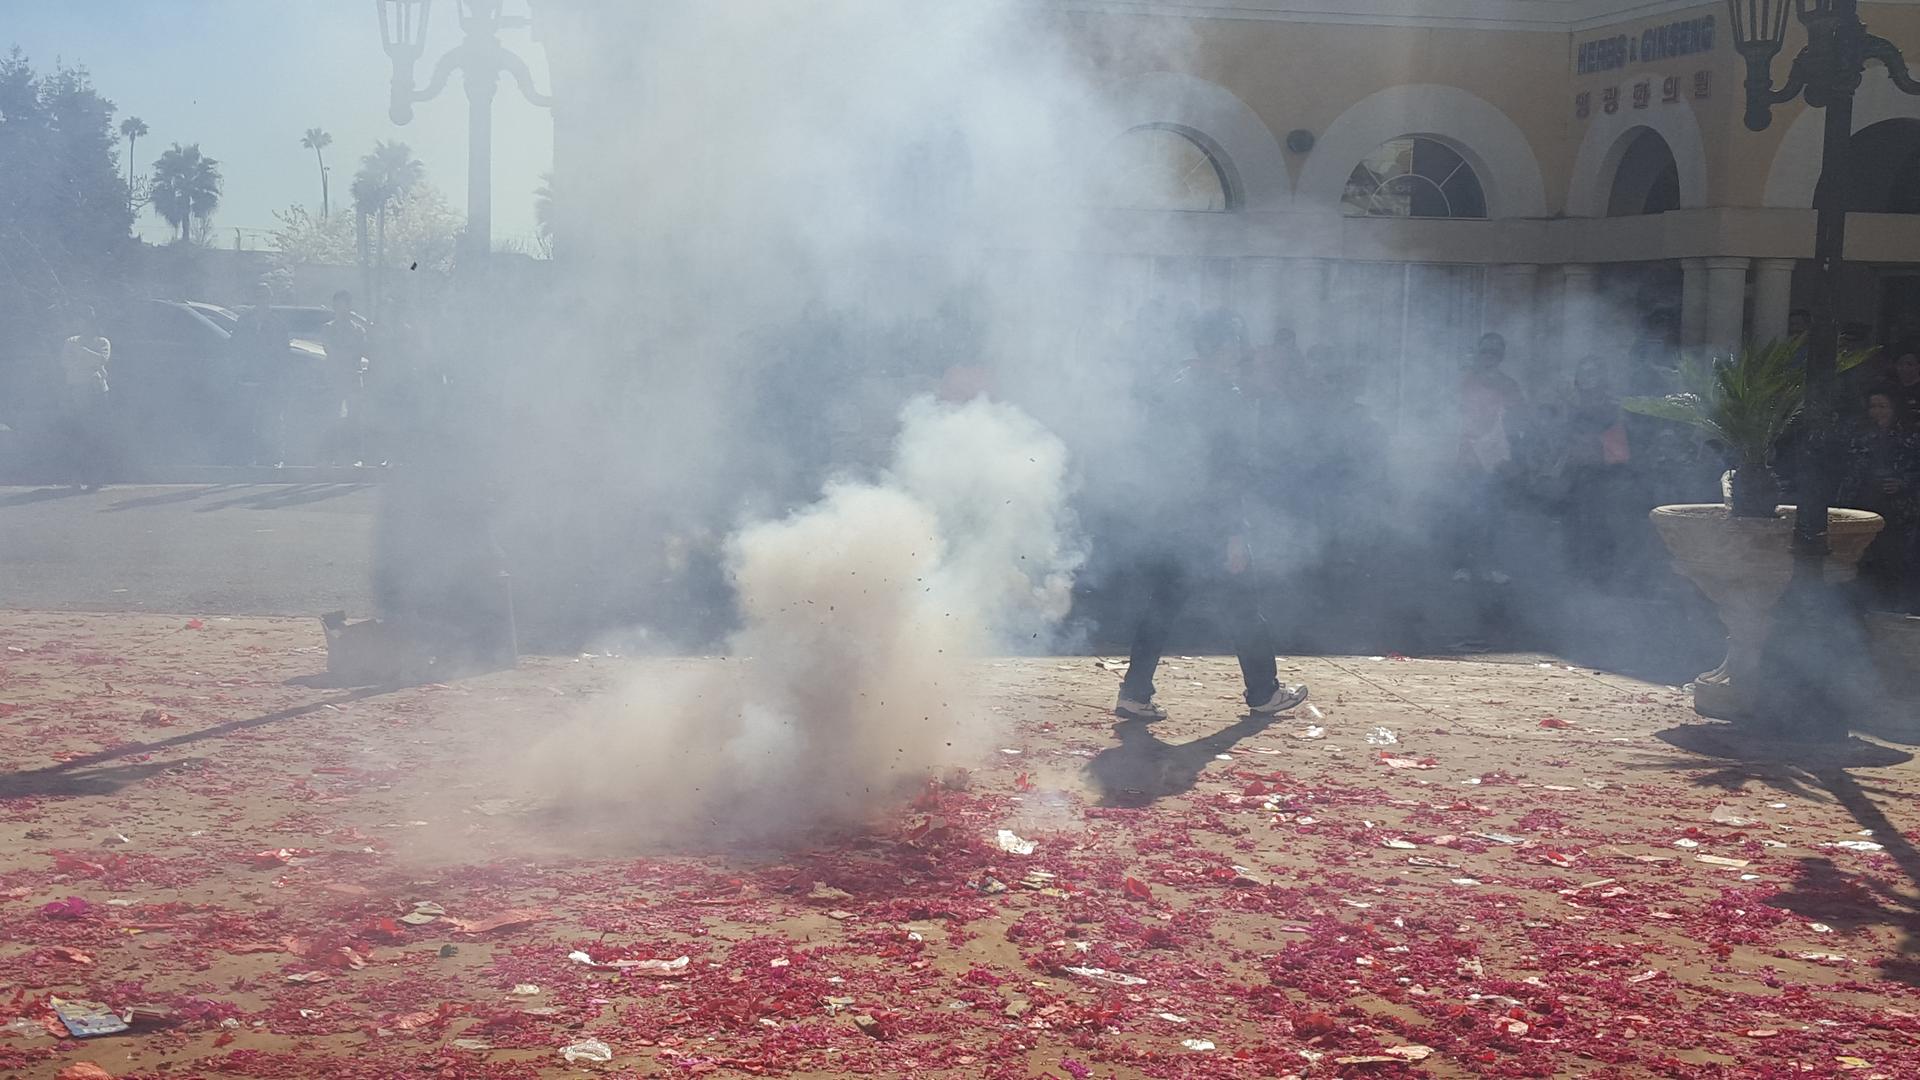 Smoke in front of a man, with remnants of firecrackers on the ground